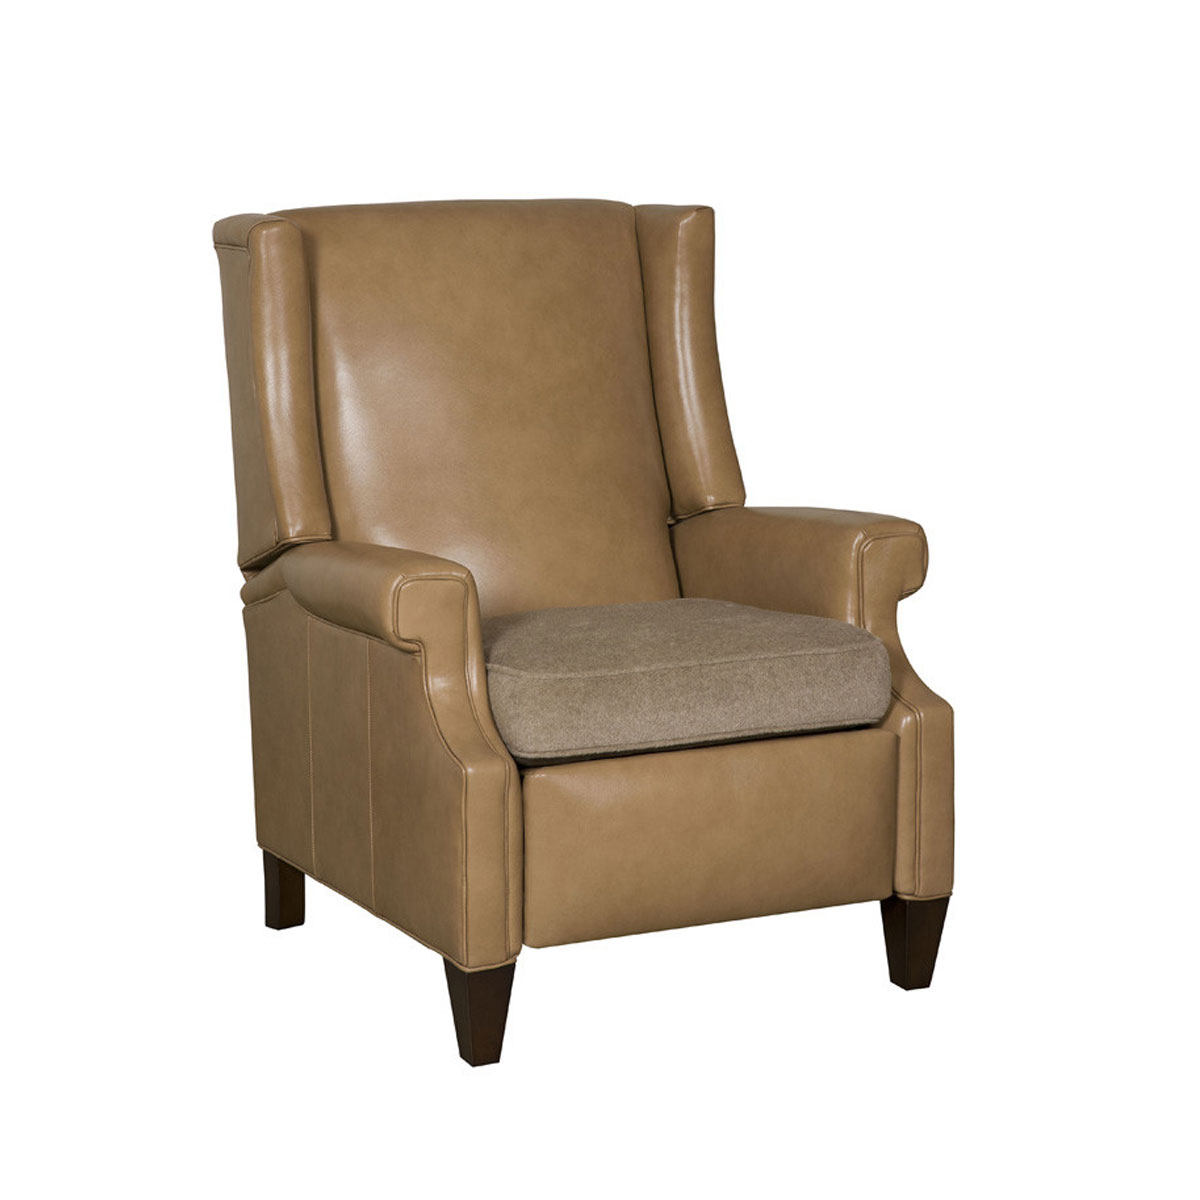 Rebekah 107 Recliner by McKinley Leather